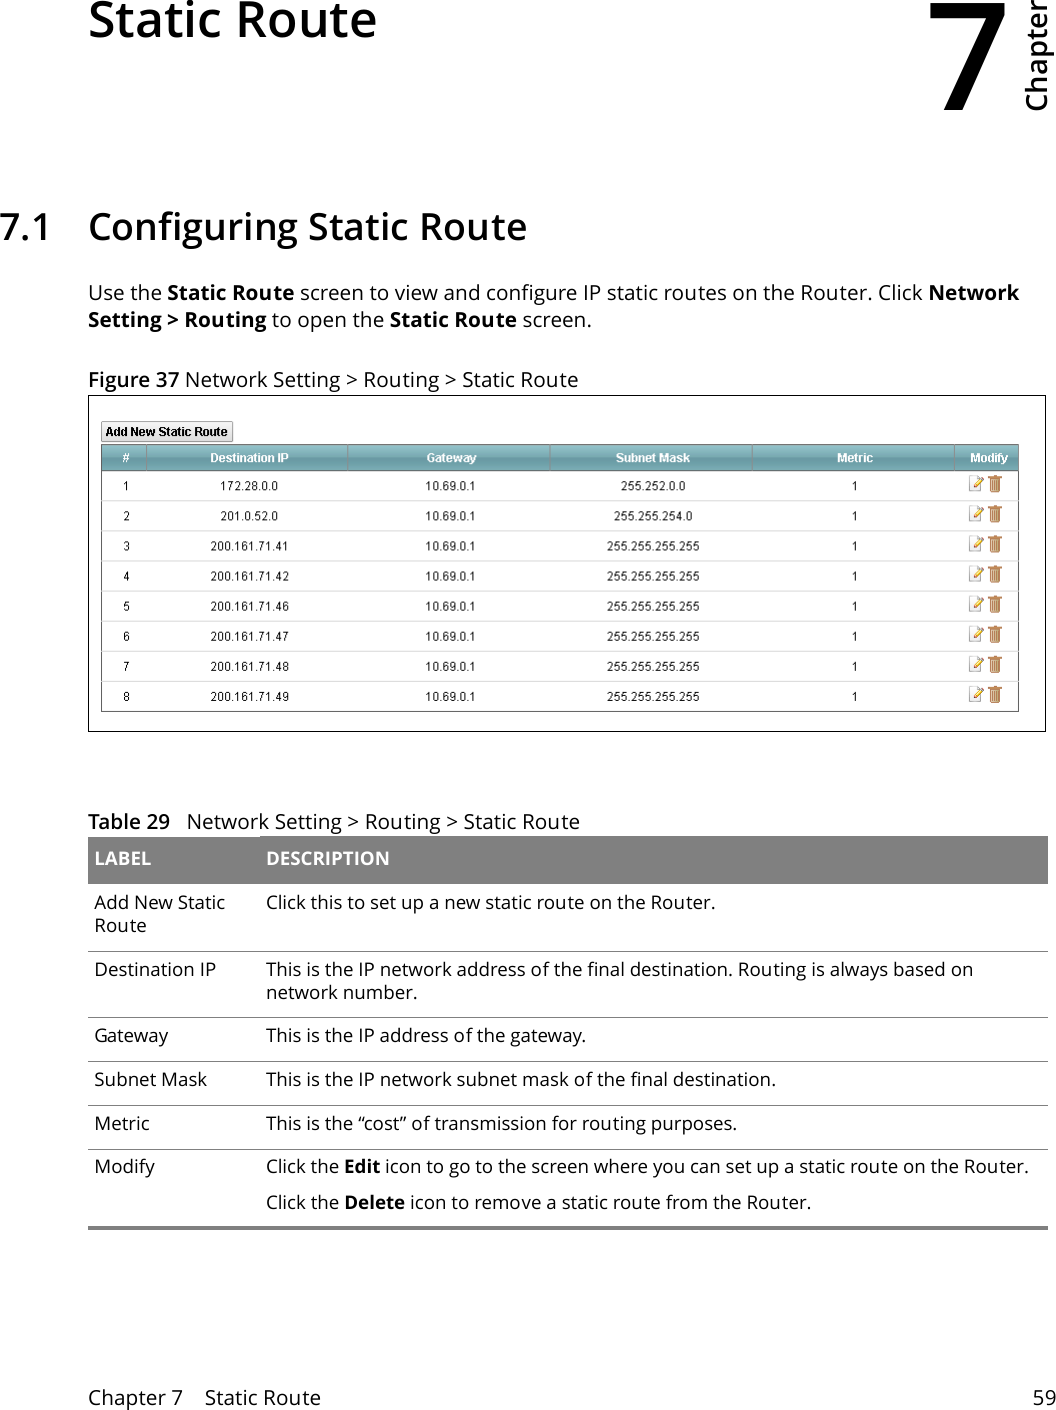 7Chapter Chapter 7    Static Route 59CHAPTER 7 Chapter 7 Static Route7.1   Configuring Static Route Use the Static Route screen to view and configure IP static routes on the Router. Click Network Setting &gt; Routing to open the Static Route screen. Figure 37 Network Setting &gt; Routing &gt; Static Route Table 29   Network Setting &gt; Routing &gt; Static Route LABEL DESCRIPTIONAdd New Static RouteClick this to set up a new static route on the Router.Destination IP This is the IP network address of the final destination. Routing is always based on network number. Gateway This is the IP address of the gateway. Subnet Mask This is the IP network subnet mask of the final destination.Metric This is the “cost” of transmission for routing purposes.Modify Click the Edit icon to go to the screen where you can set up a static route on the Router.Click the Delete icon to remove a static route from the Router. 